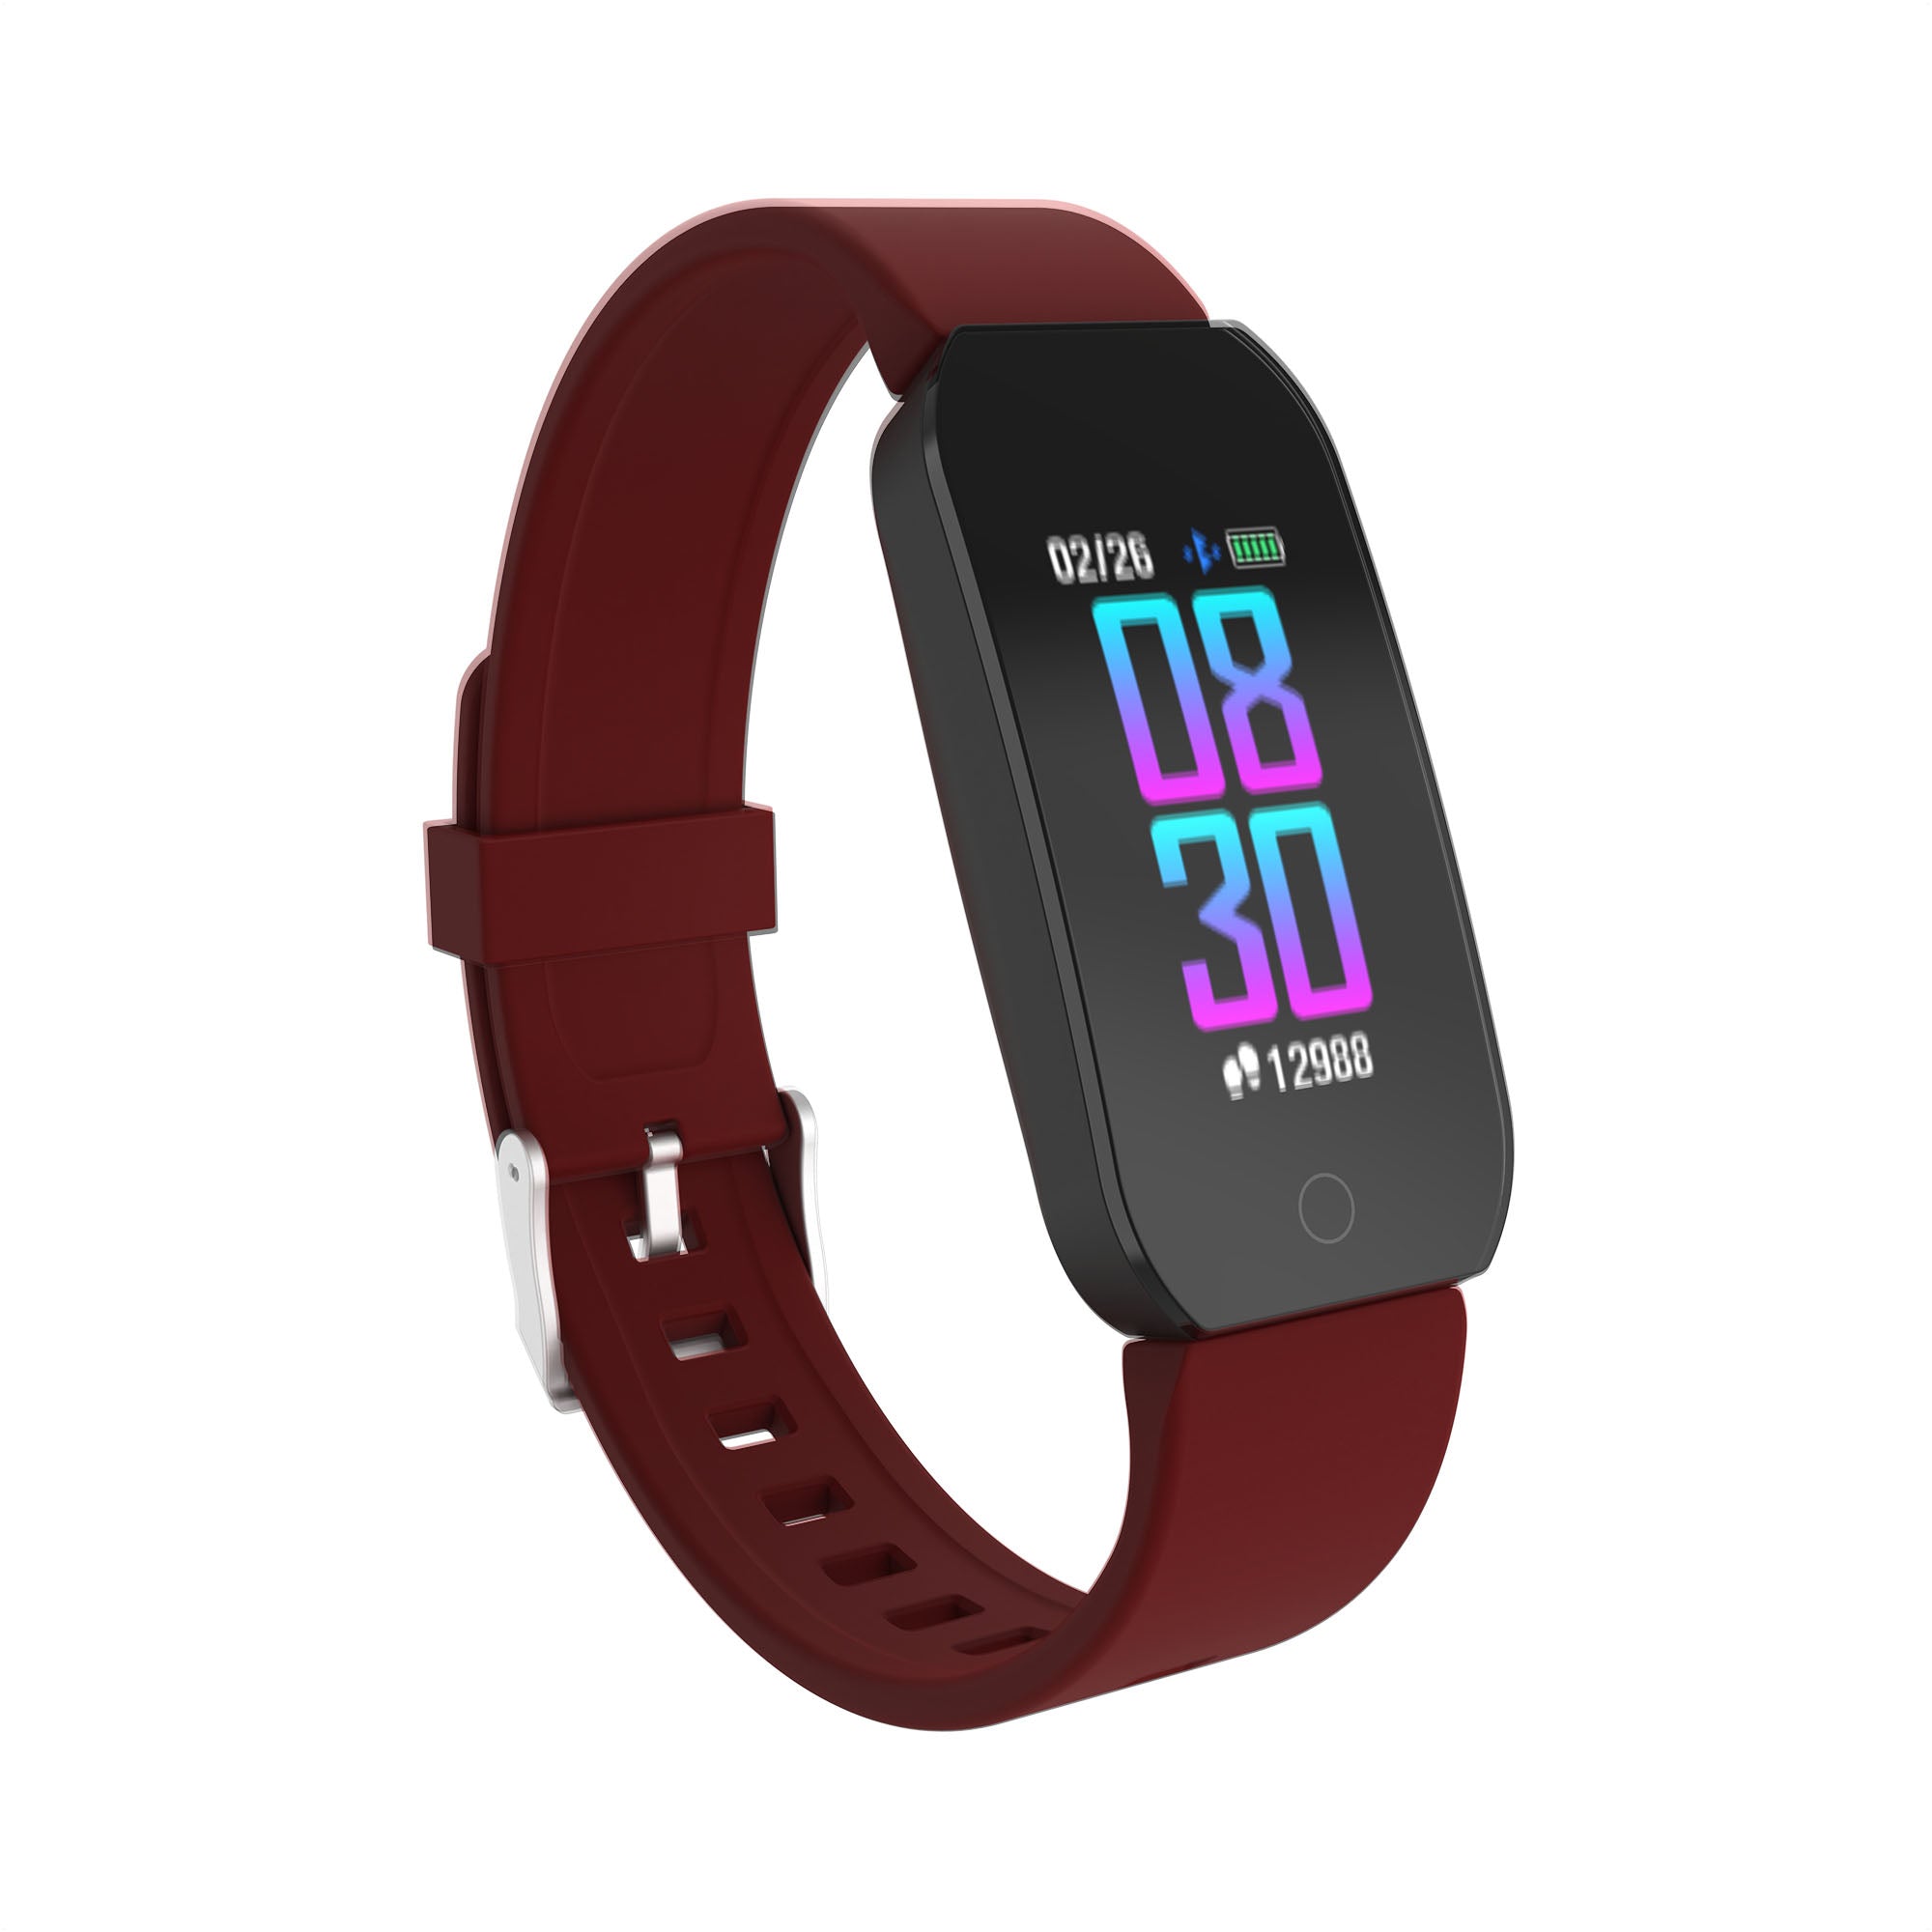 iTouch Active Fitness Tracker in Burgundy